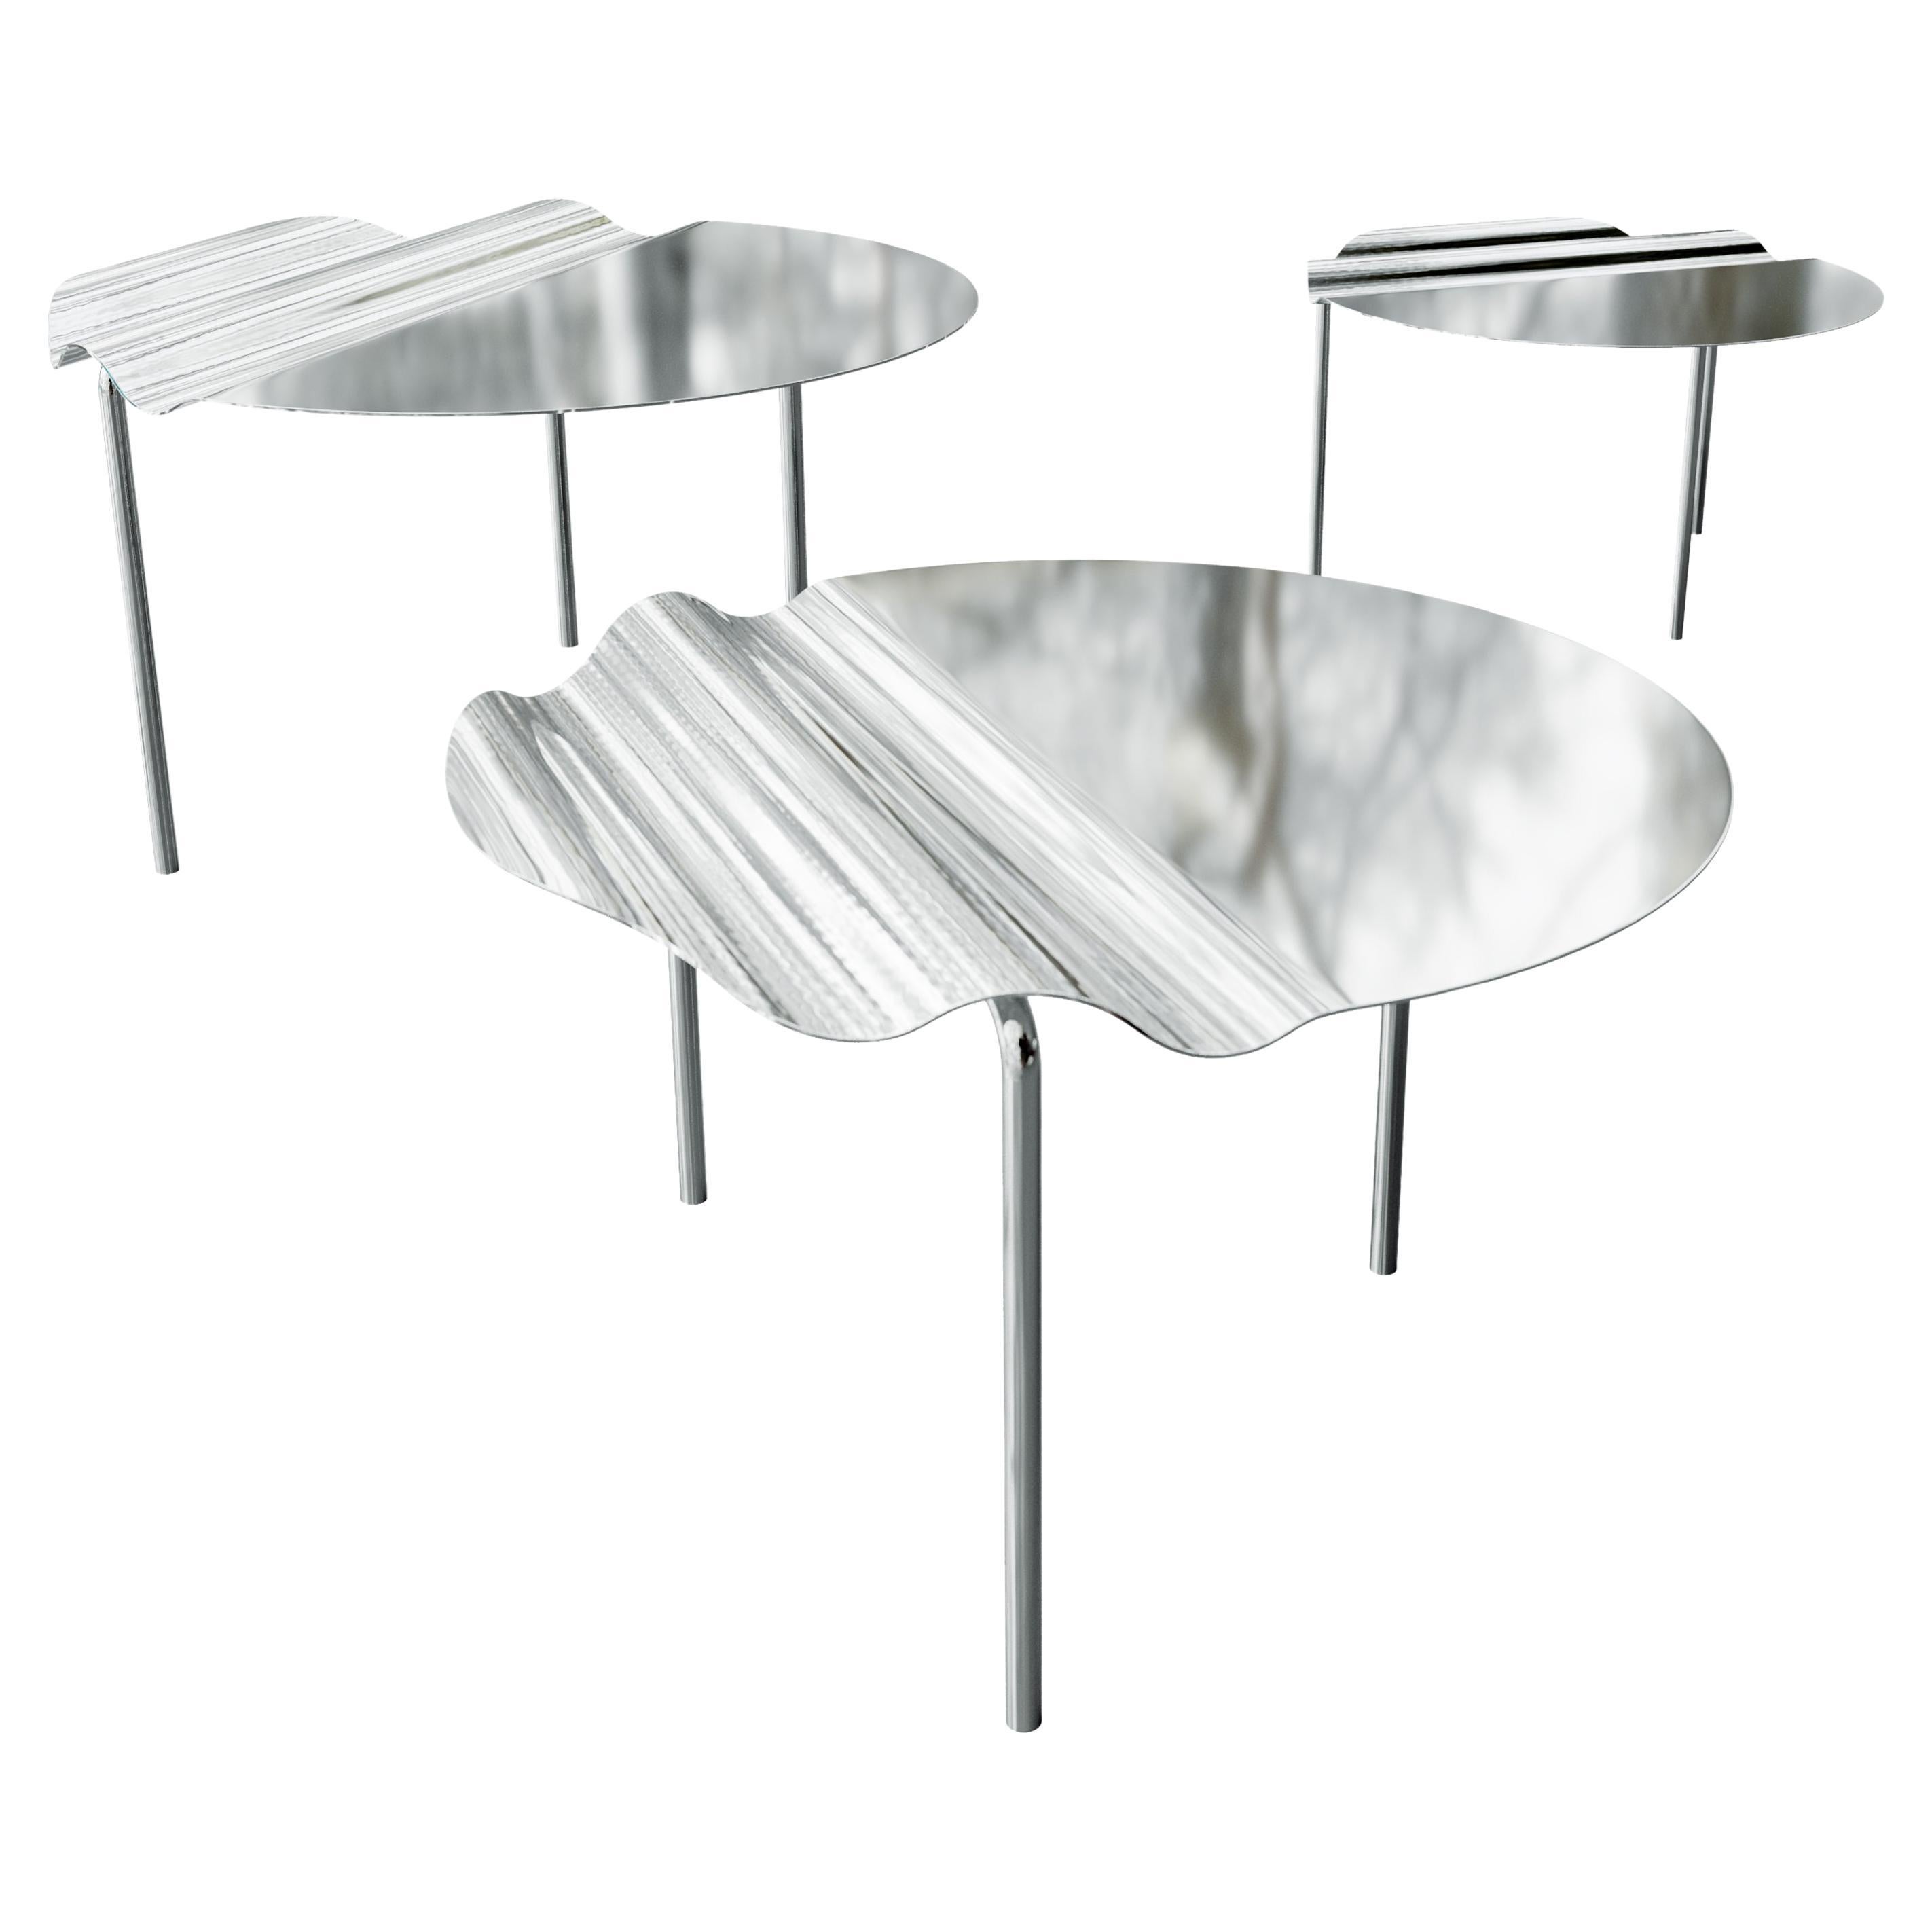 Set of Three Modern Low Tables Mount Made of Stainless Steel by DALI HOME For Sale